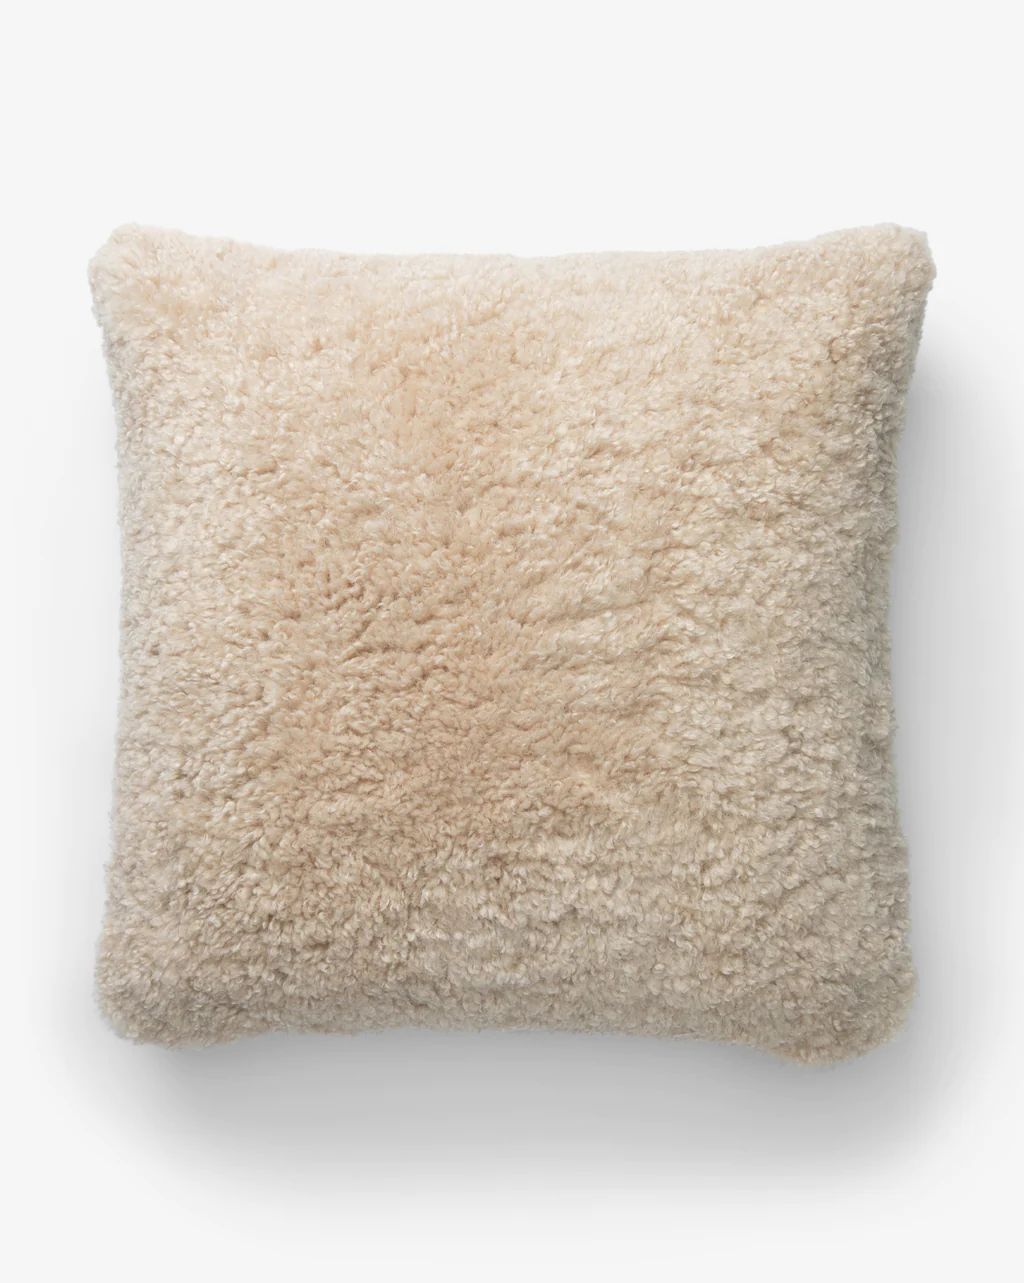 Barley Pillow Cover | McGee & Co.